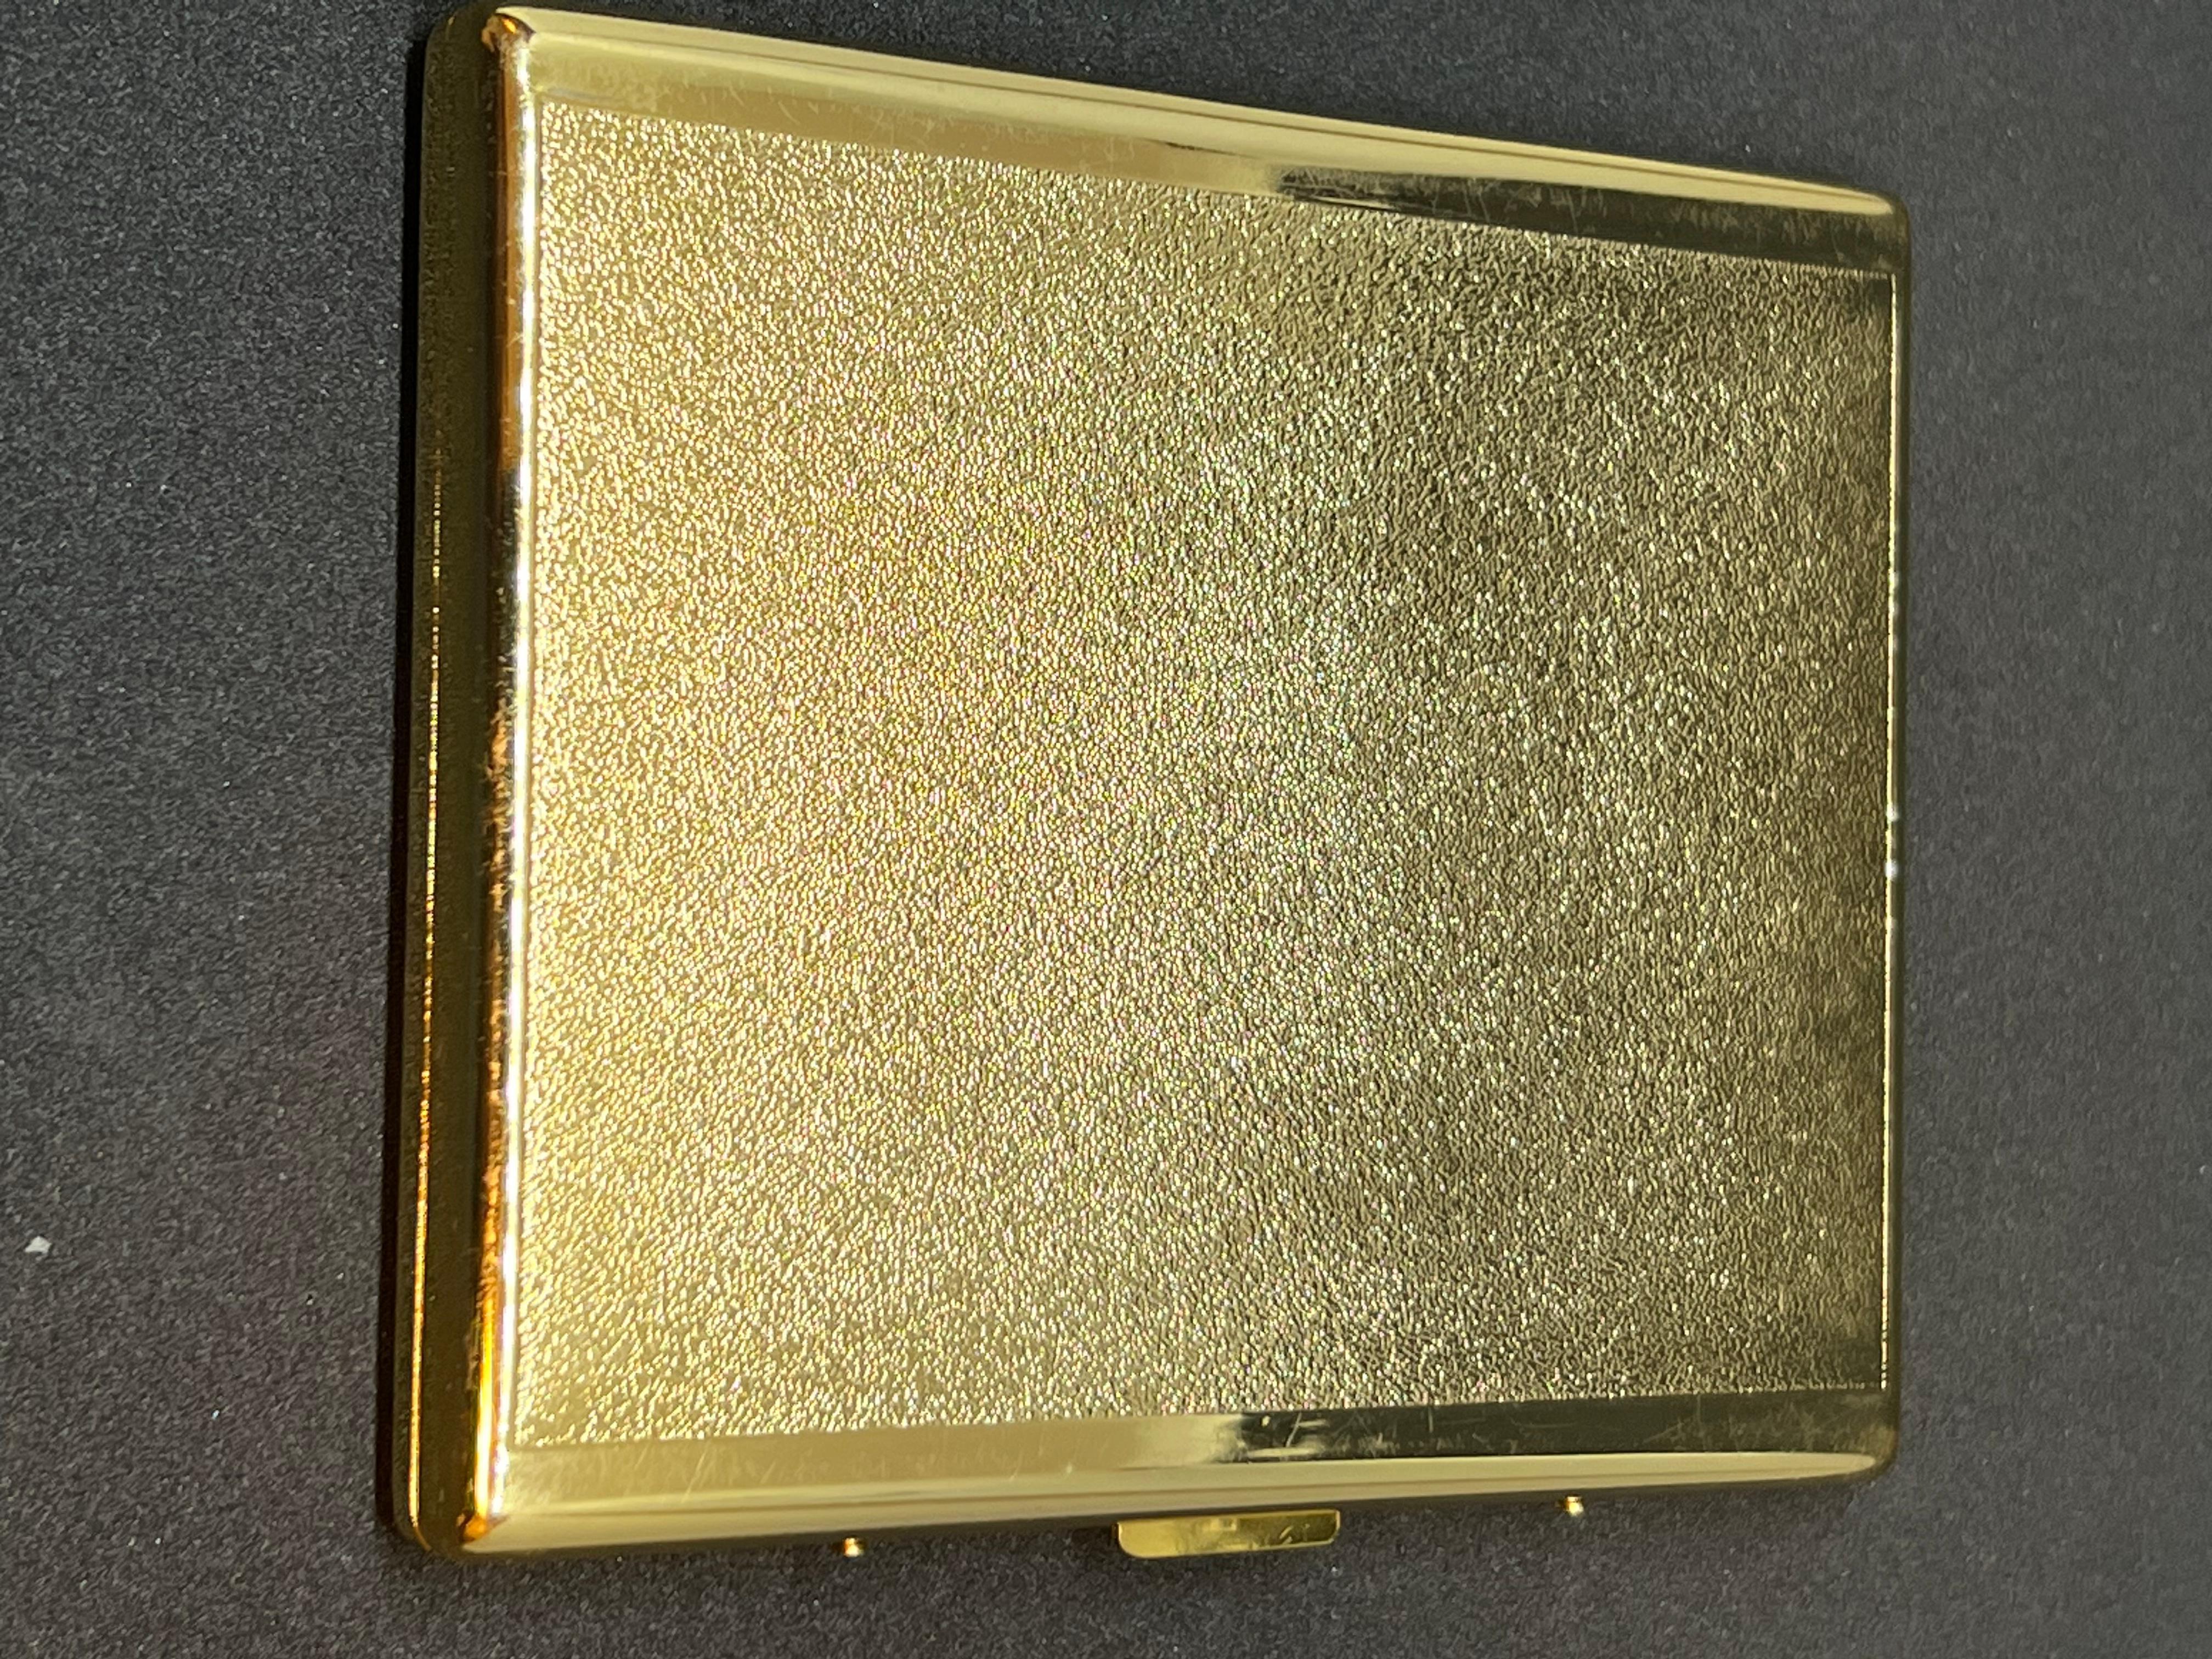 “YSL” Yves Saint Laurent Gold Plated Retro “Jungle” Cigarette Case In Excellent Condition For Sale In New York, NY